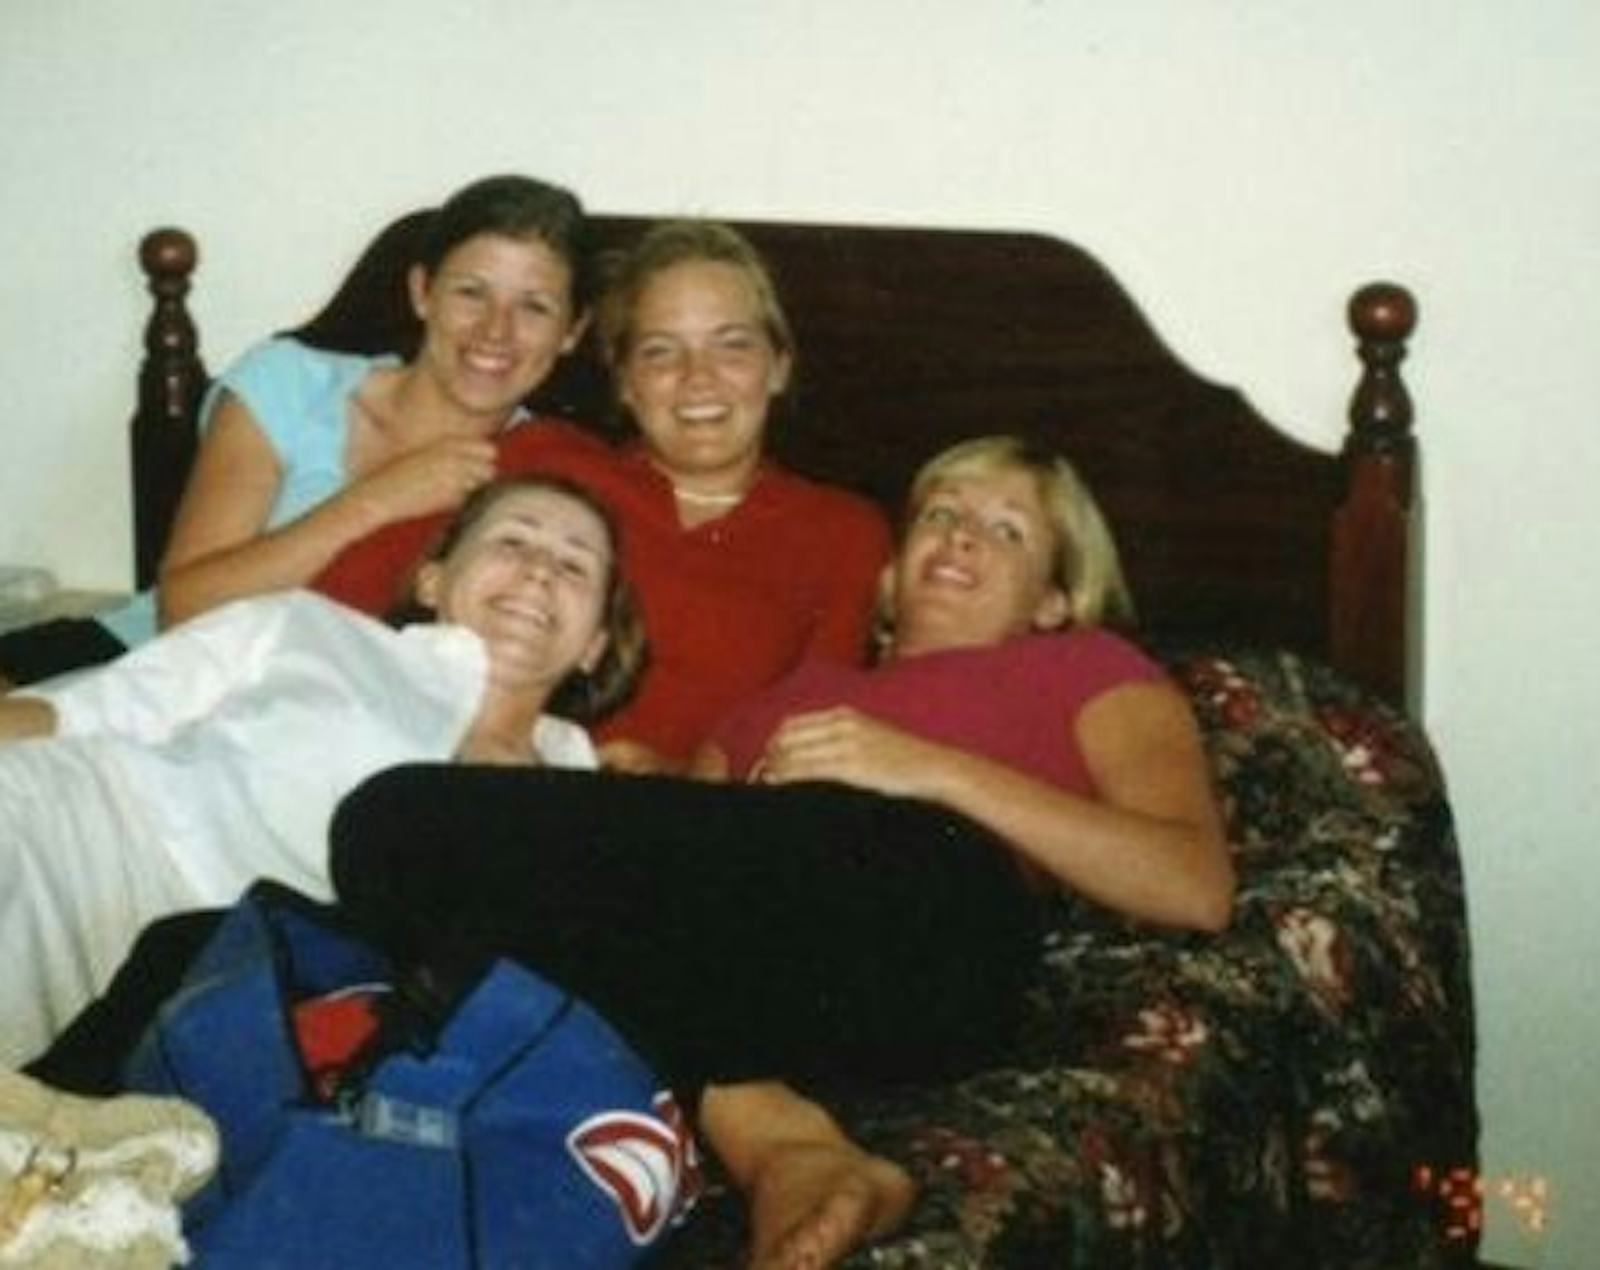 7 Things You Did At Sleepovers In The 90s Thatll Make You Want To